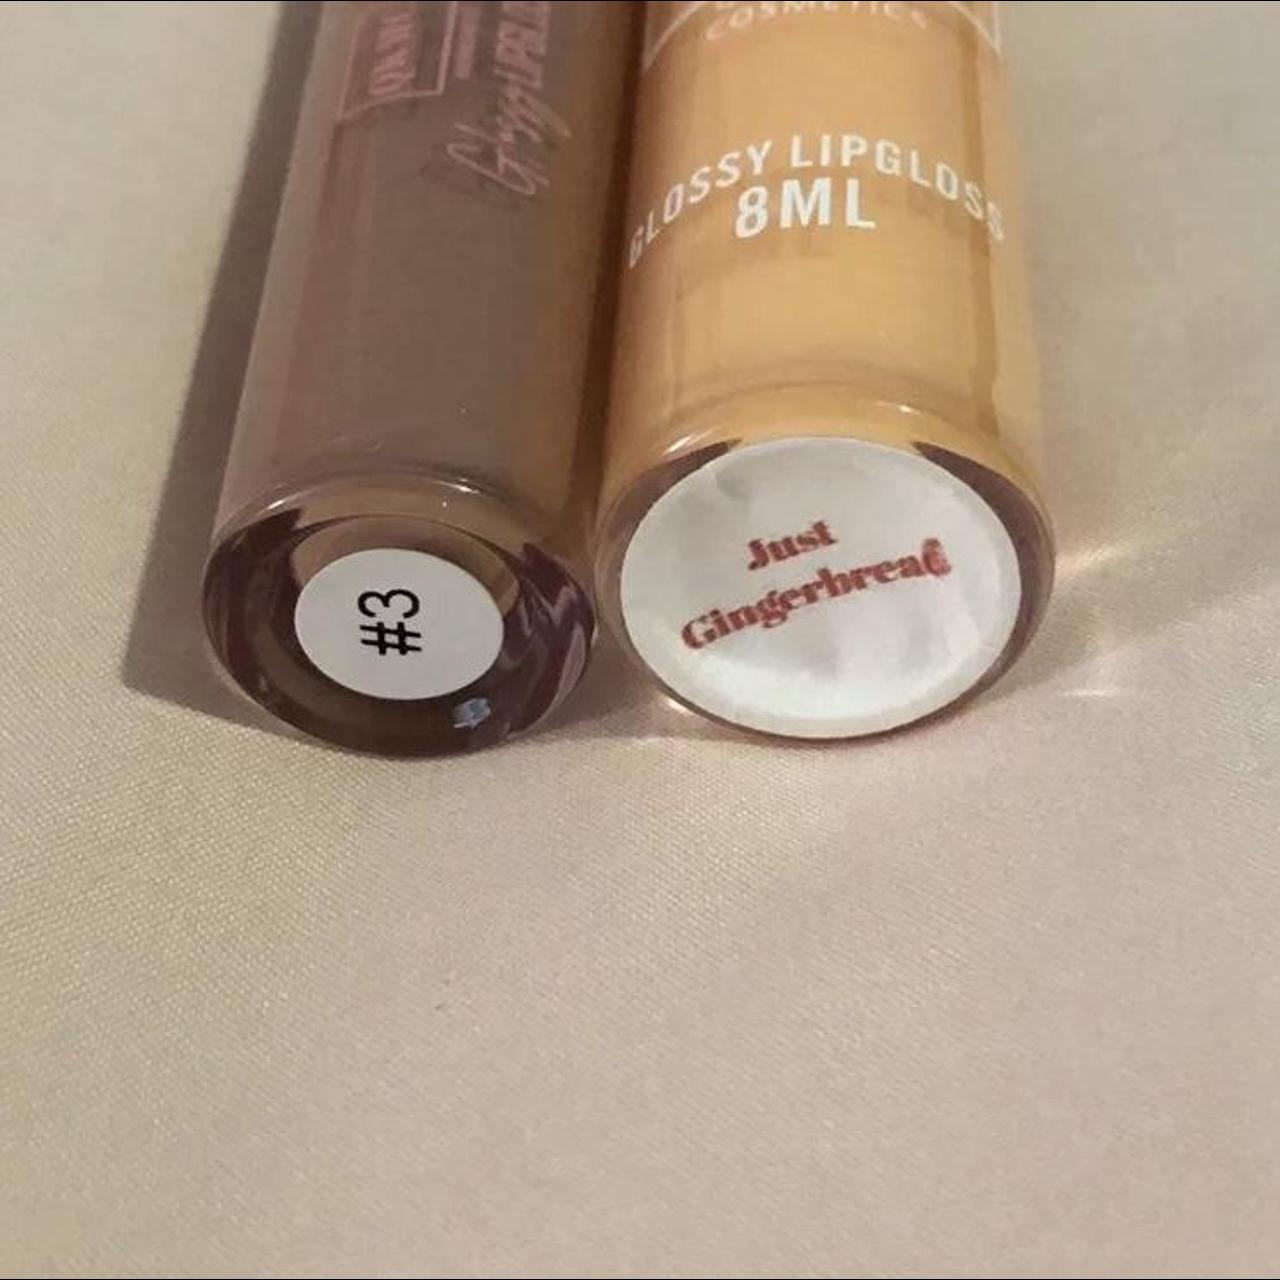 Product Image 2 - This Queen KM Cosmetics bundle